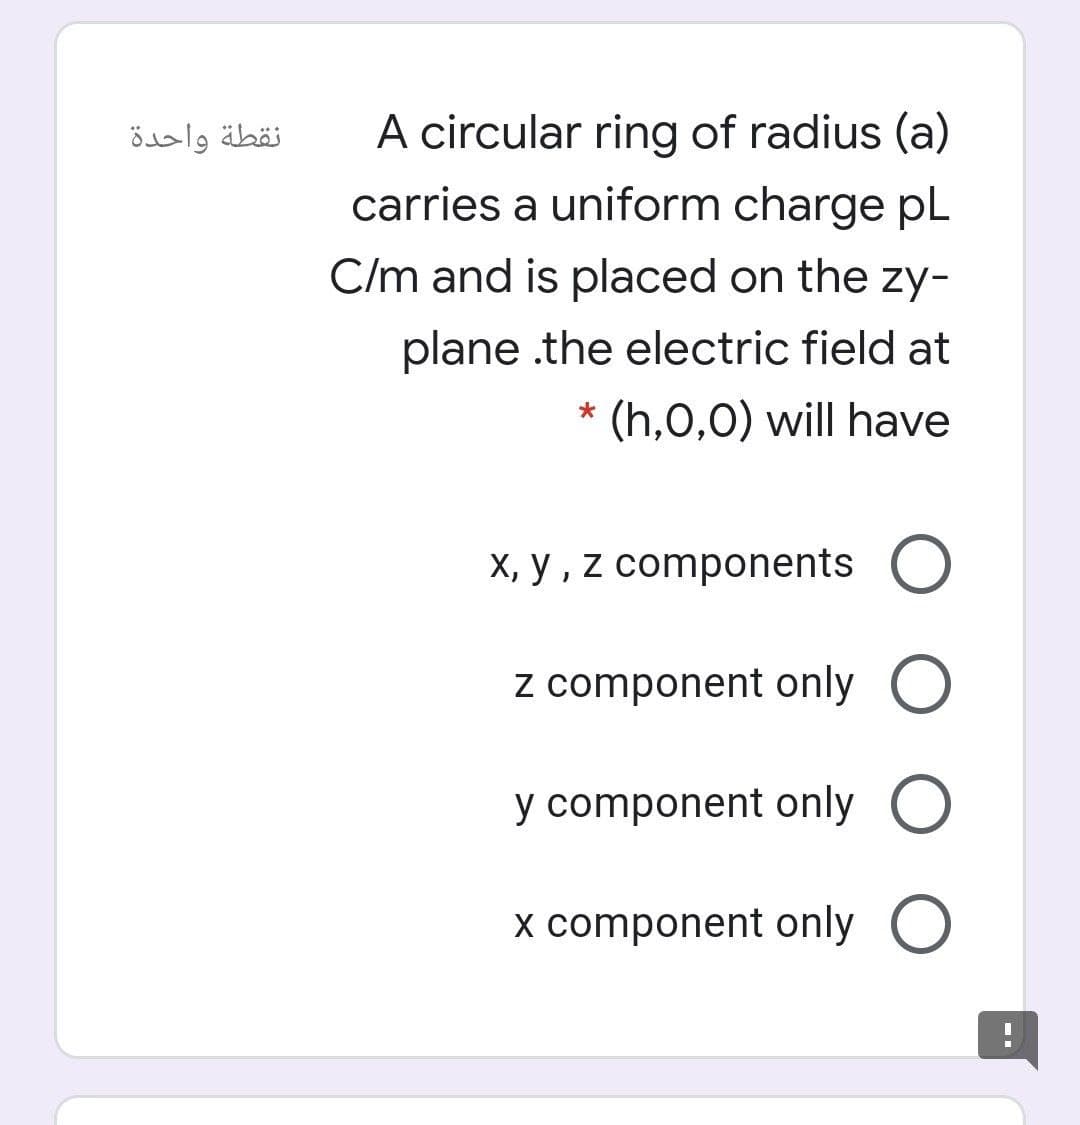 A circular ring of radius (a)
carries a uniform charge pL
نقطة واحدة
C/m and is placed on the zy-
plane .the electric field at
(h,0,0) will have
X, y , z components O
z component only O
y component only O
x component only O
